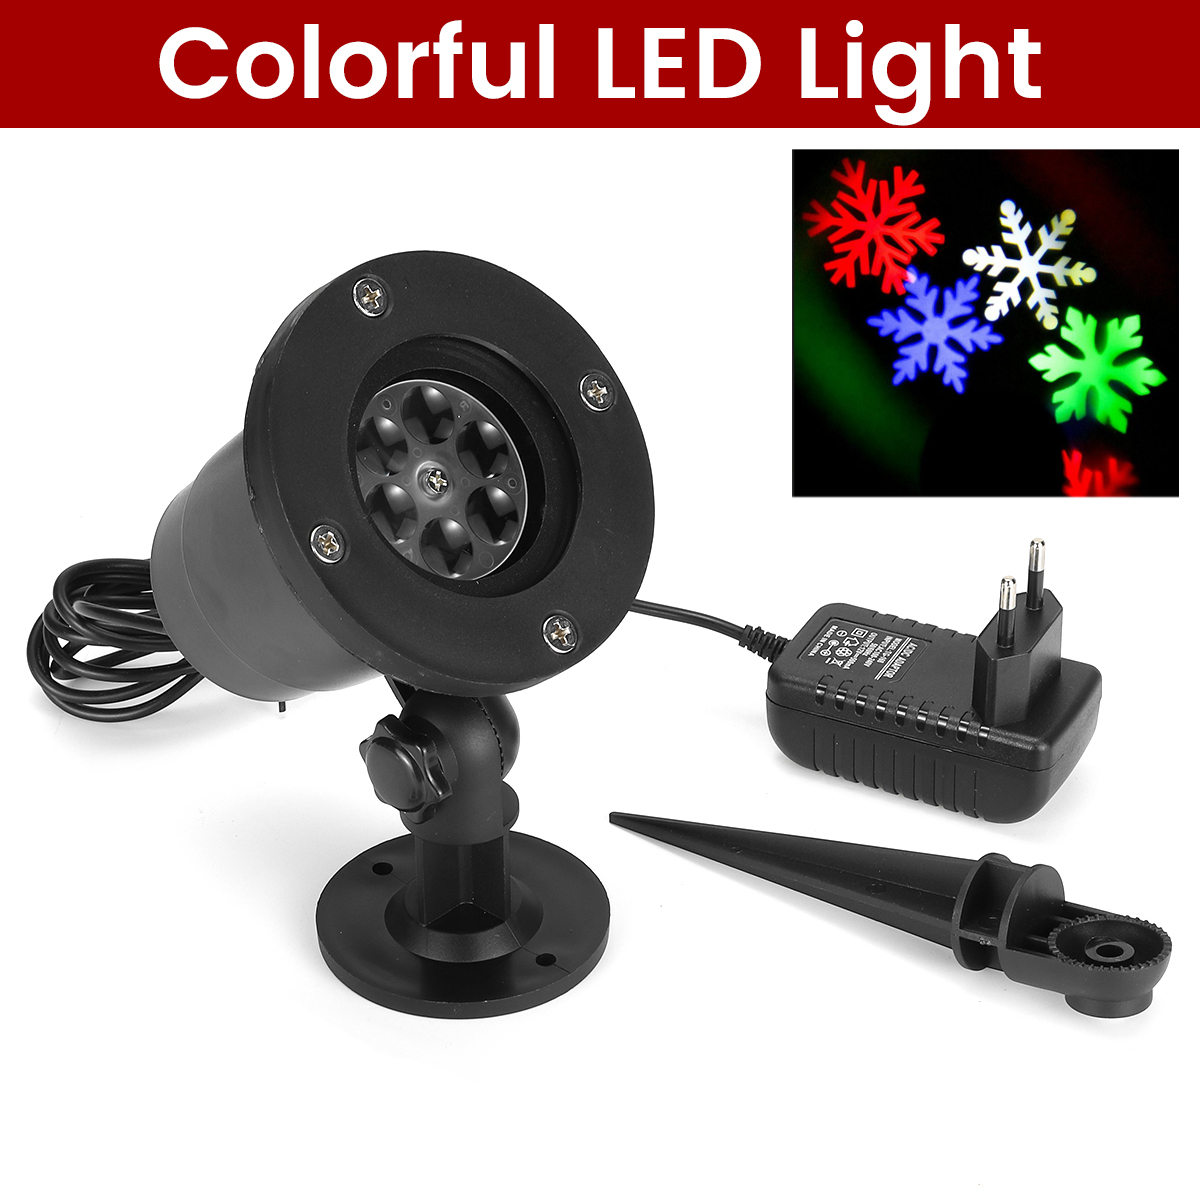 Christmas-Party-LED-Light-Full-Sky-Star-Laser-Projector-Red-Green-Laser-Lamp-For-Outdoor-Garden-Lawn-1917281-3